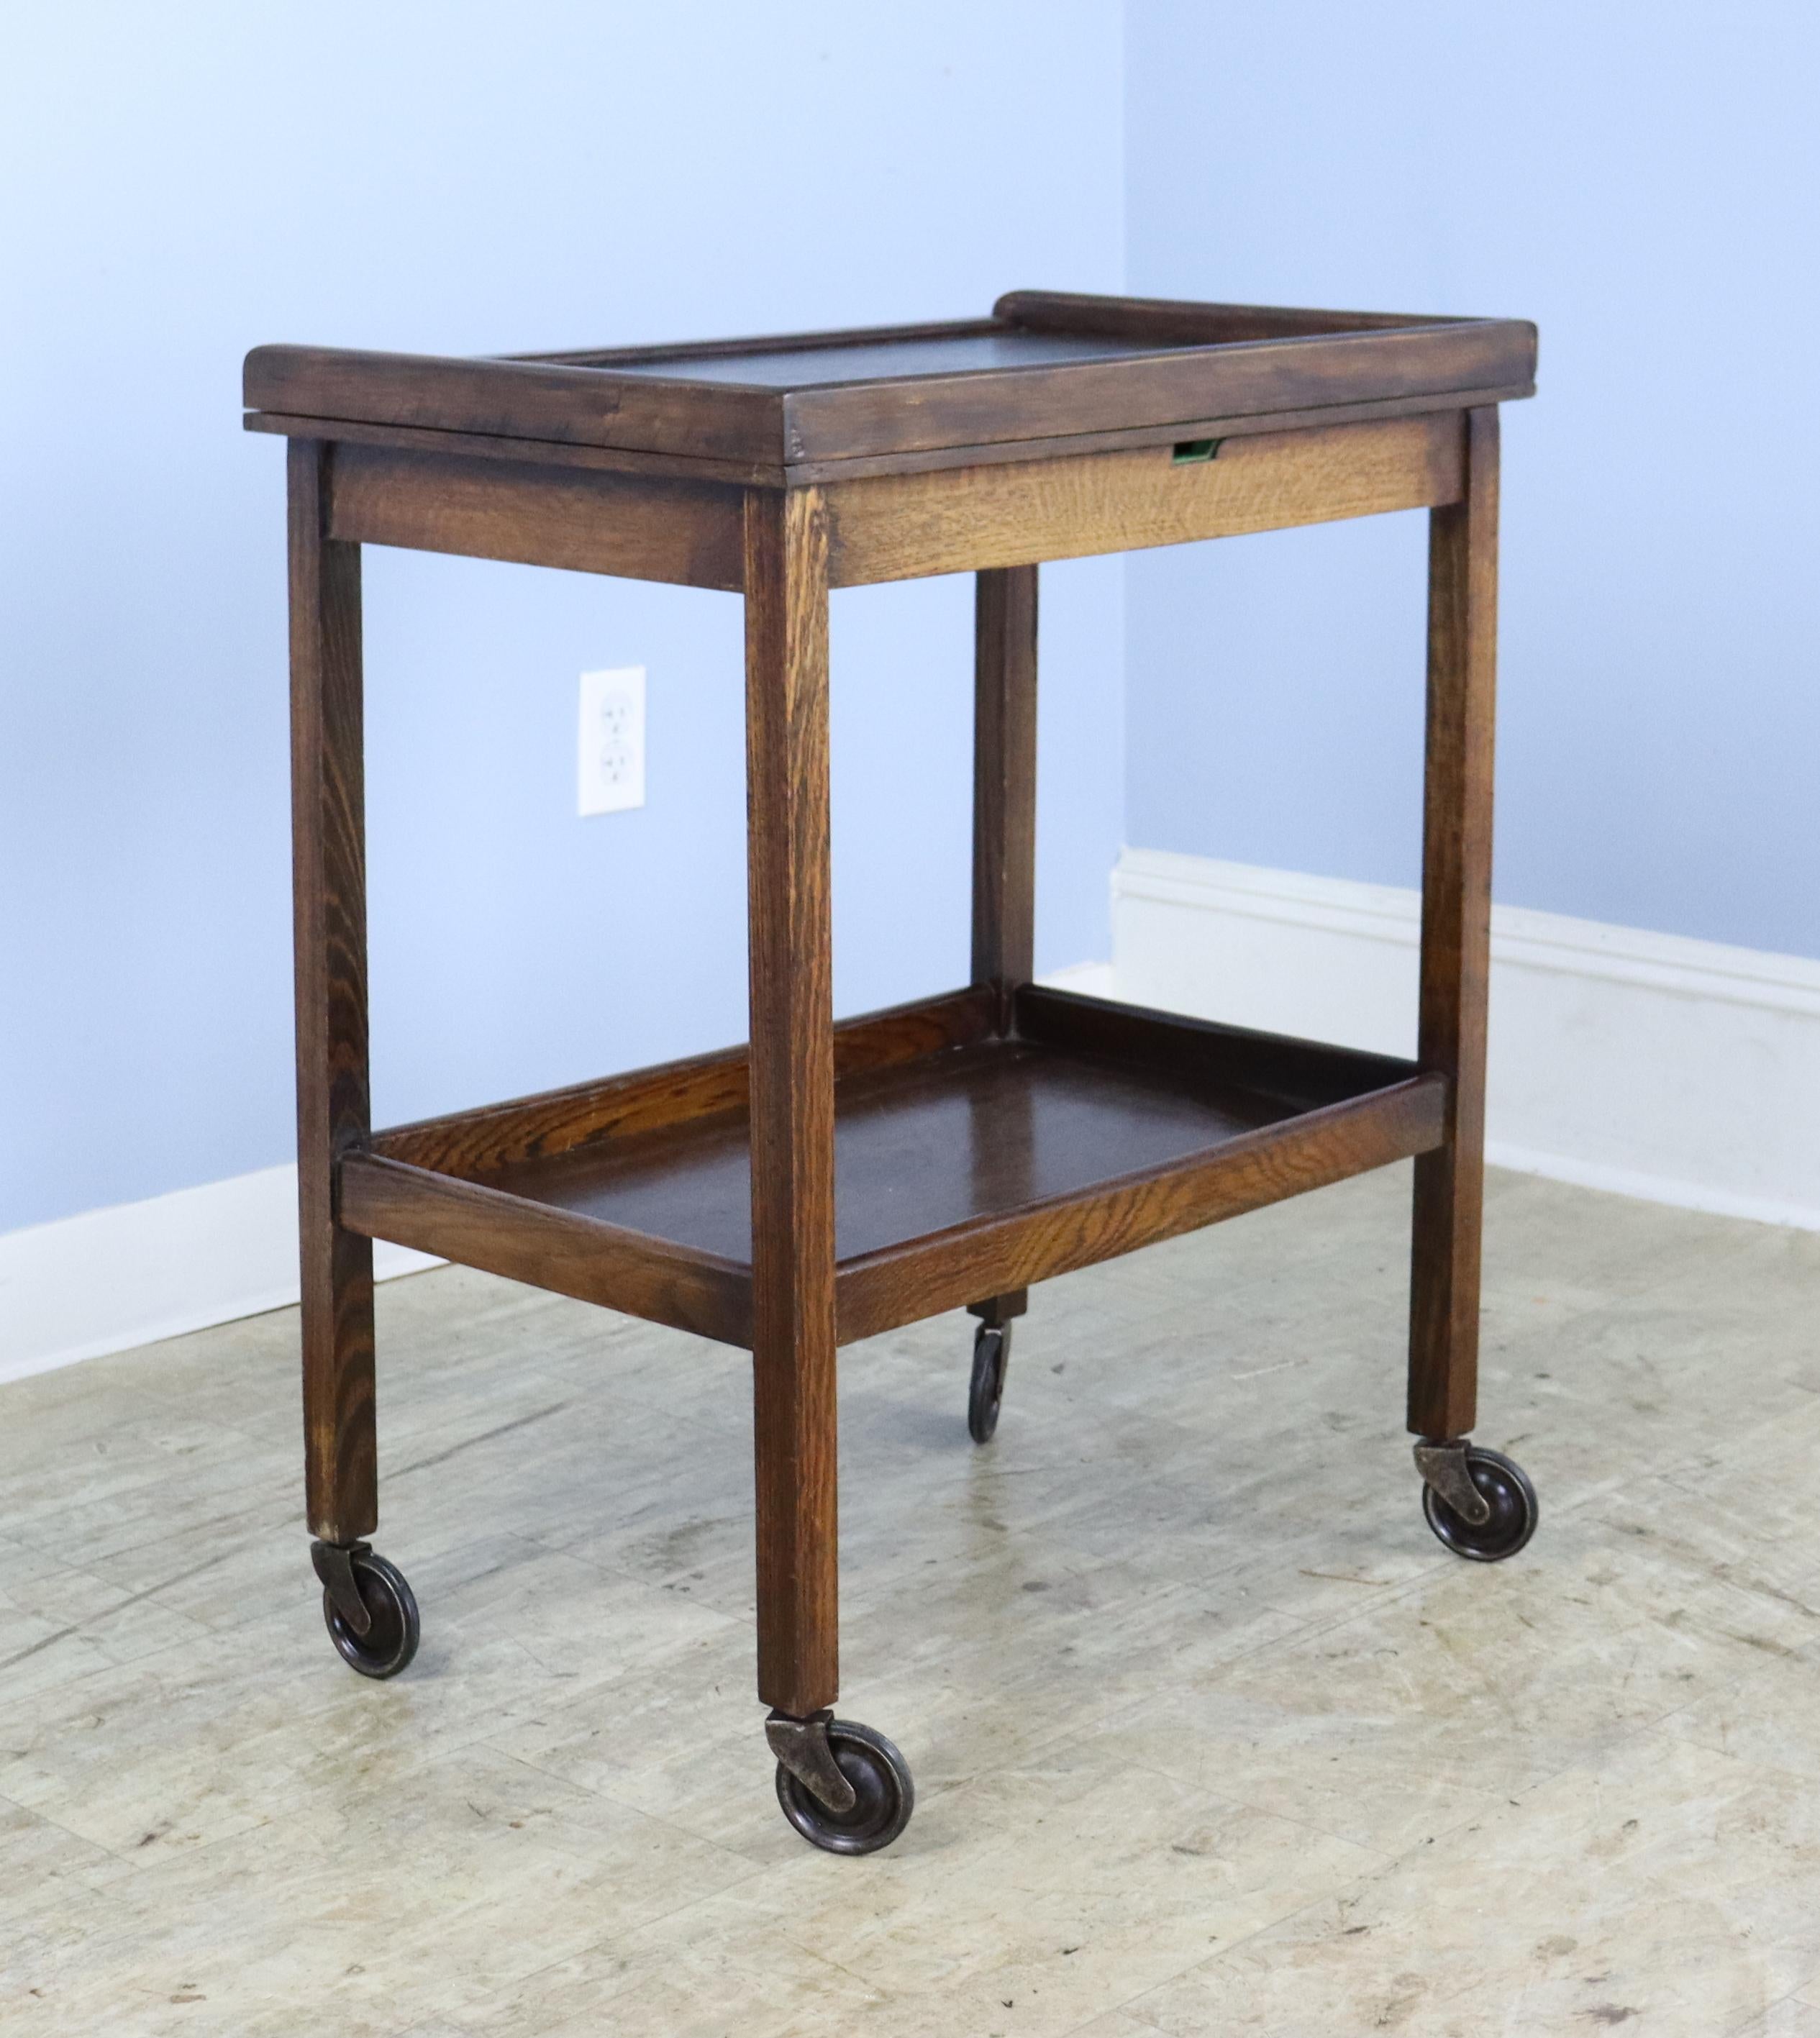 A charming side table in rich oak that converts into a larger games table.  The swivel mechanism is very easy to use, and the transformation from side table to games table takes only seconds.  The original green felt is in very good vintage